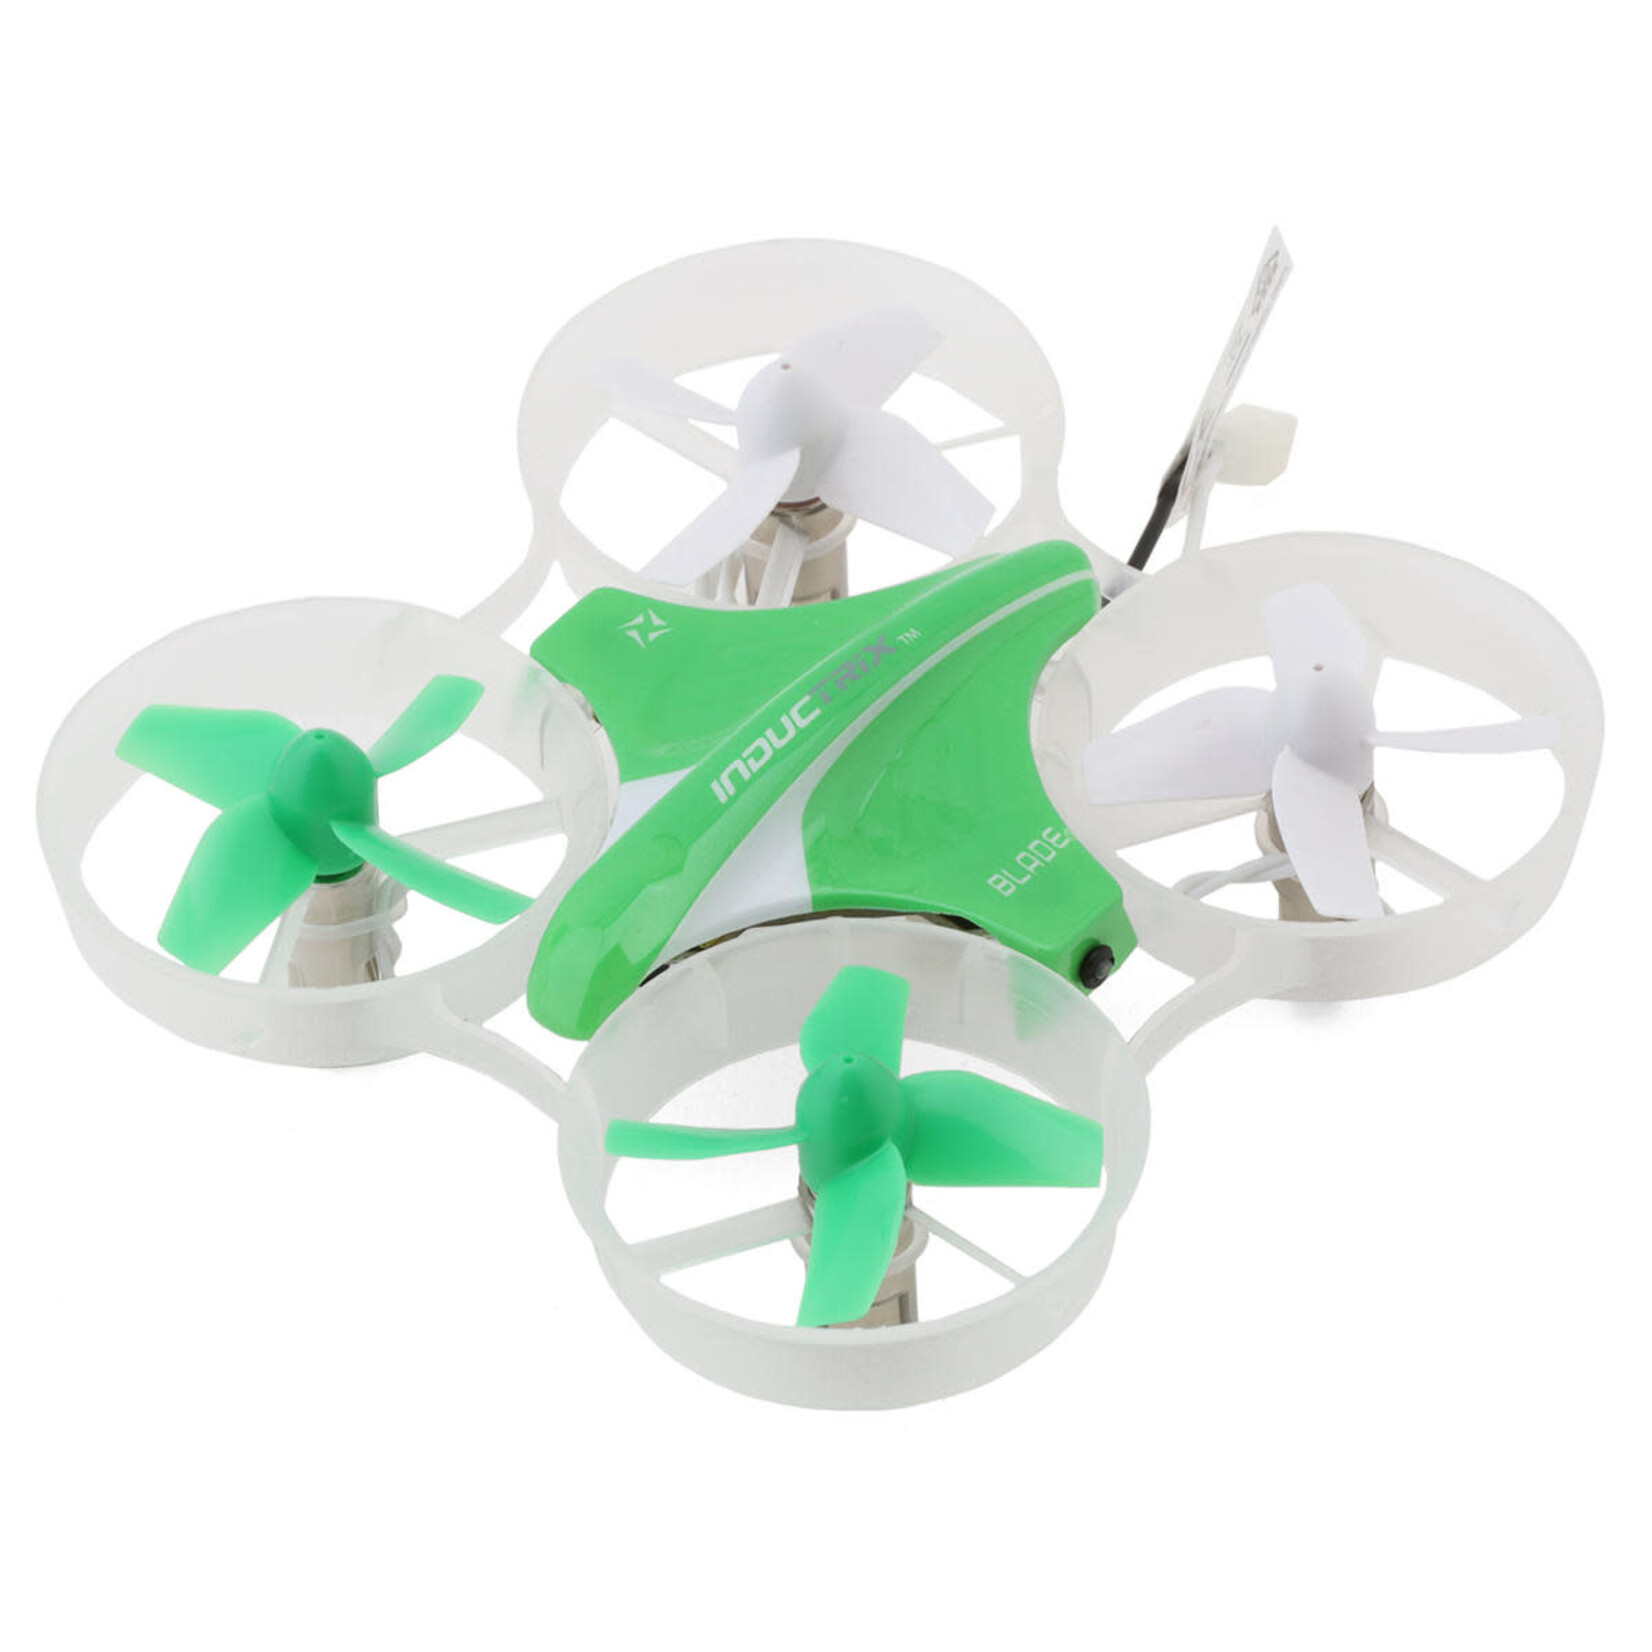 Blade Blade Inductrix RTF Ultra Micro Drone/Quadcopter w/2.4GHz Radio & SAFE #BLH08700